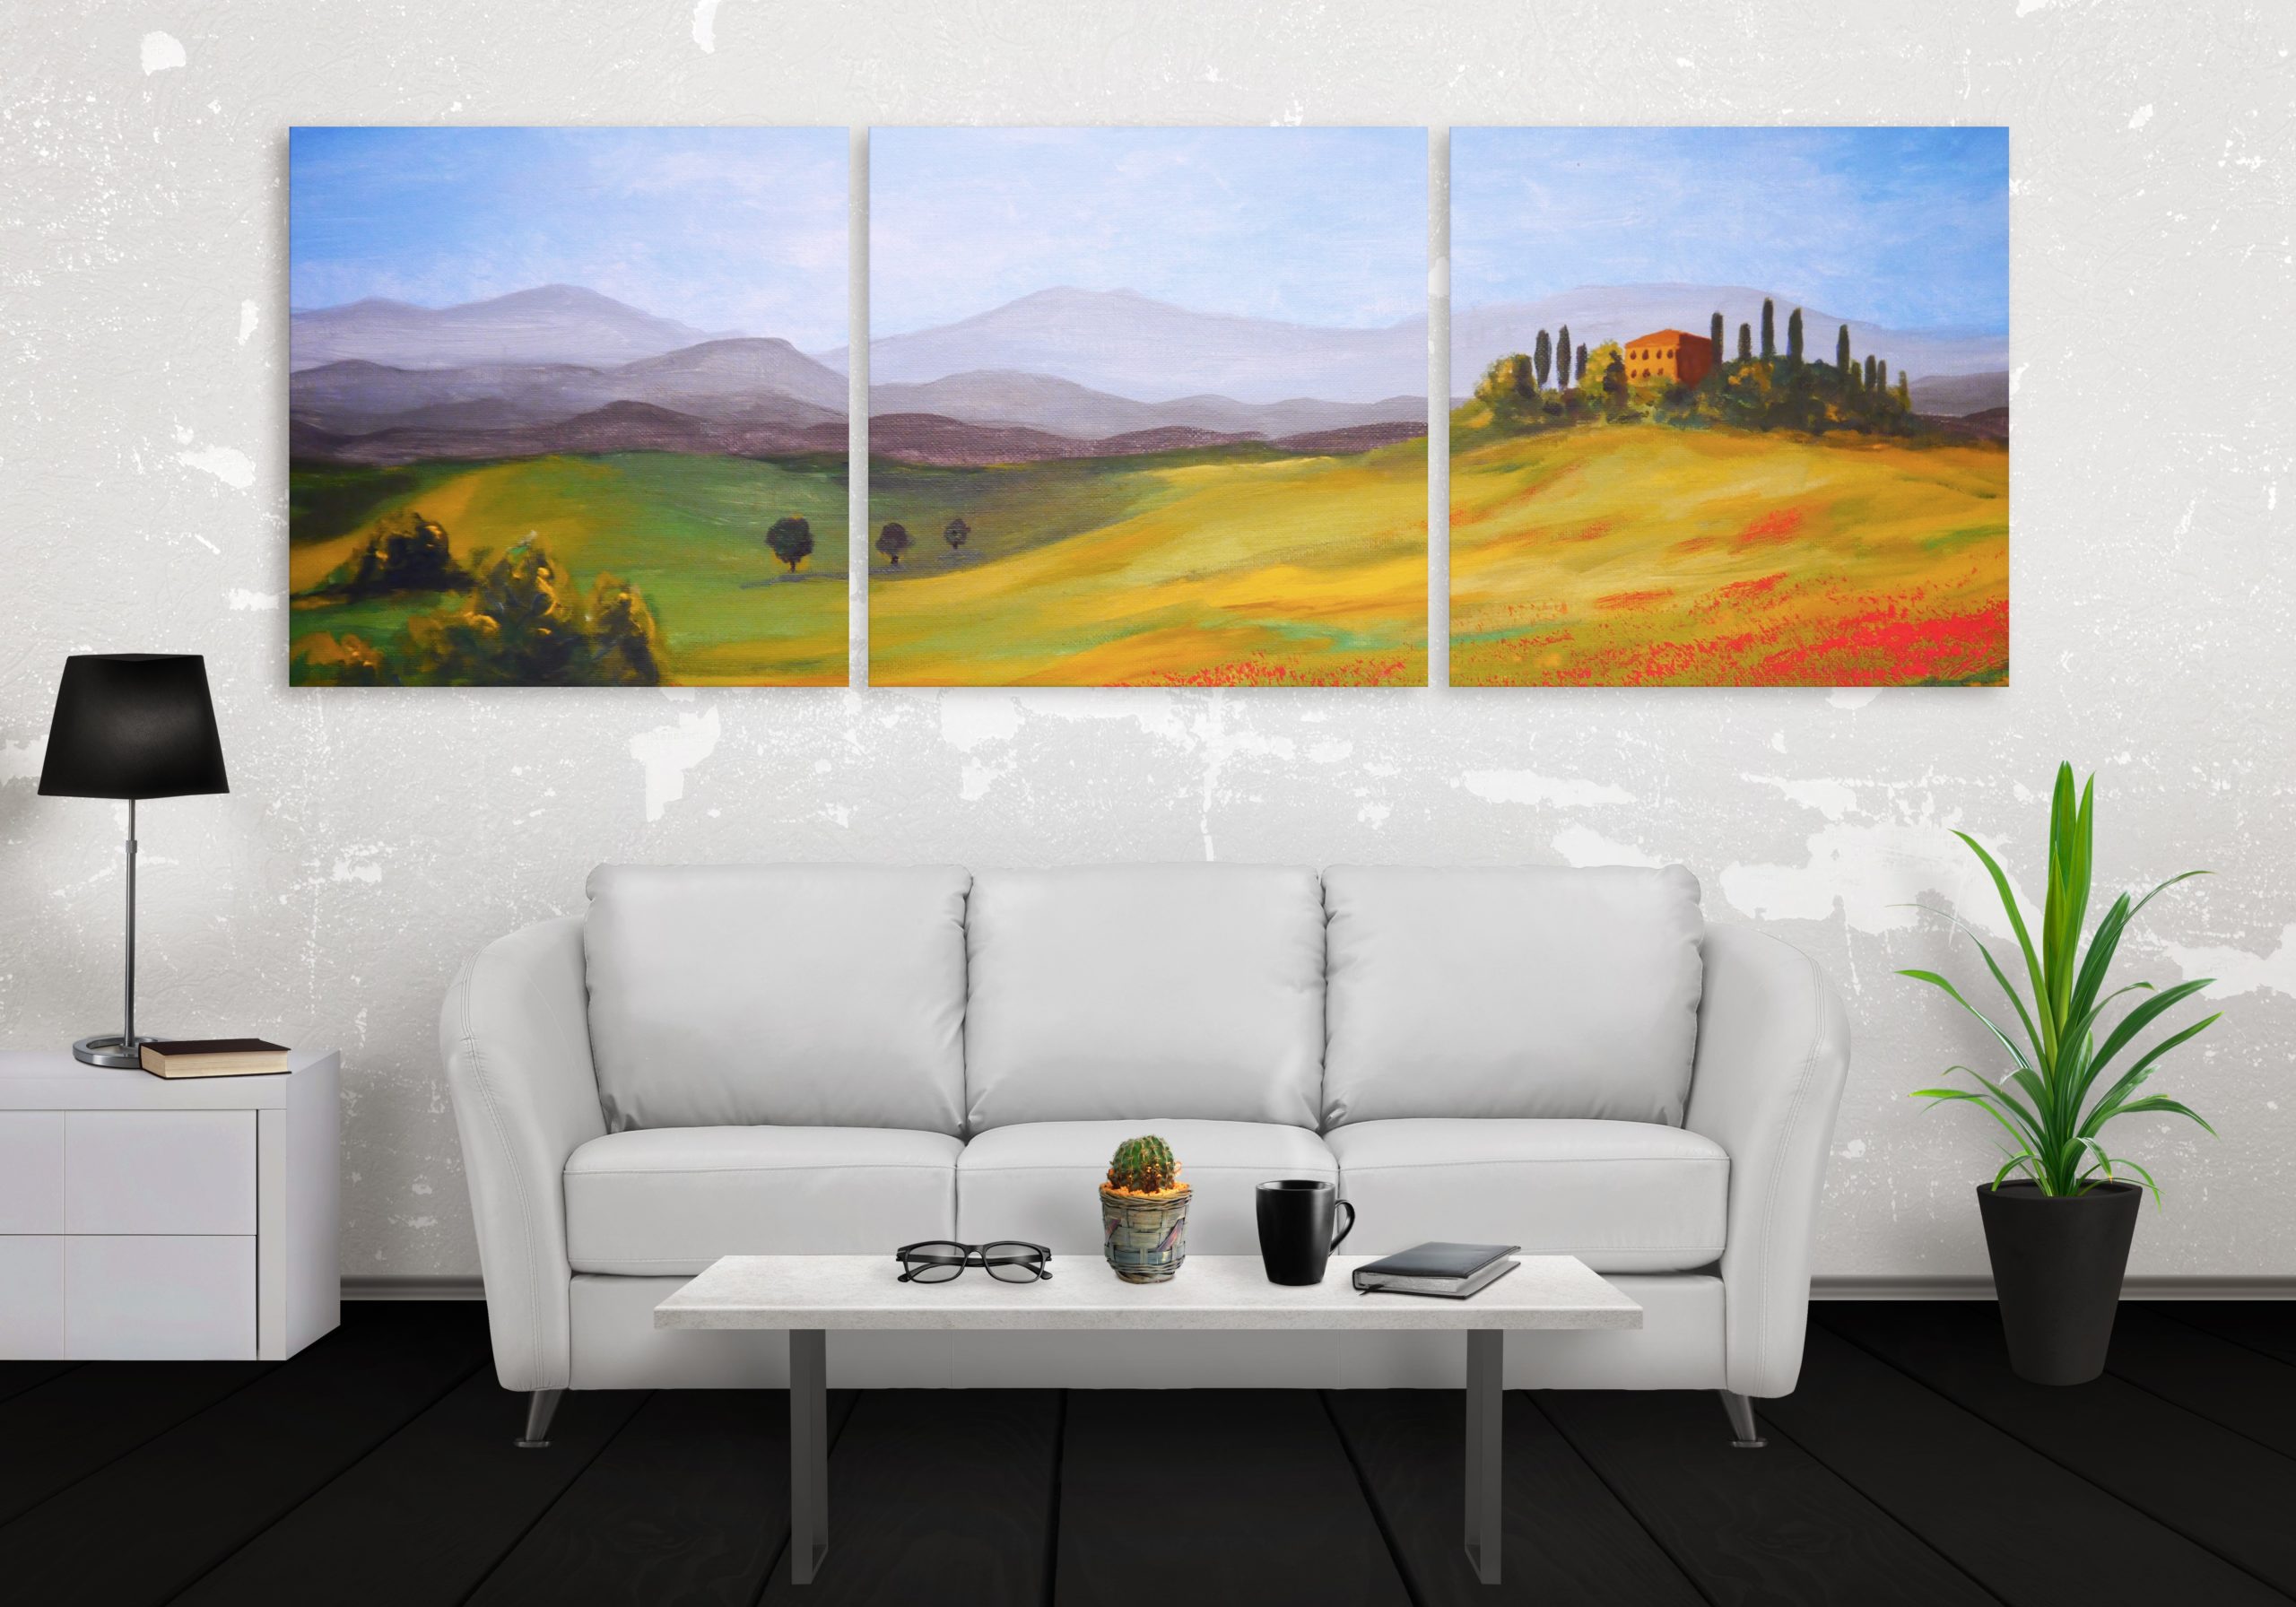 Arch2O 6 ideas for decorating your interiors with canvas art prints